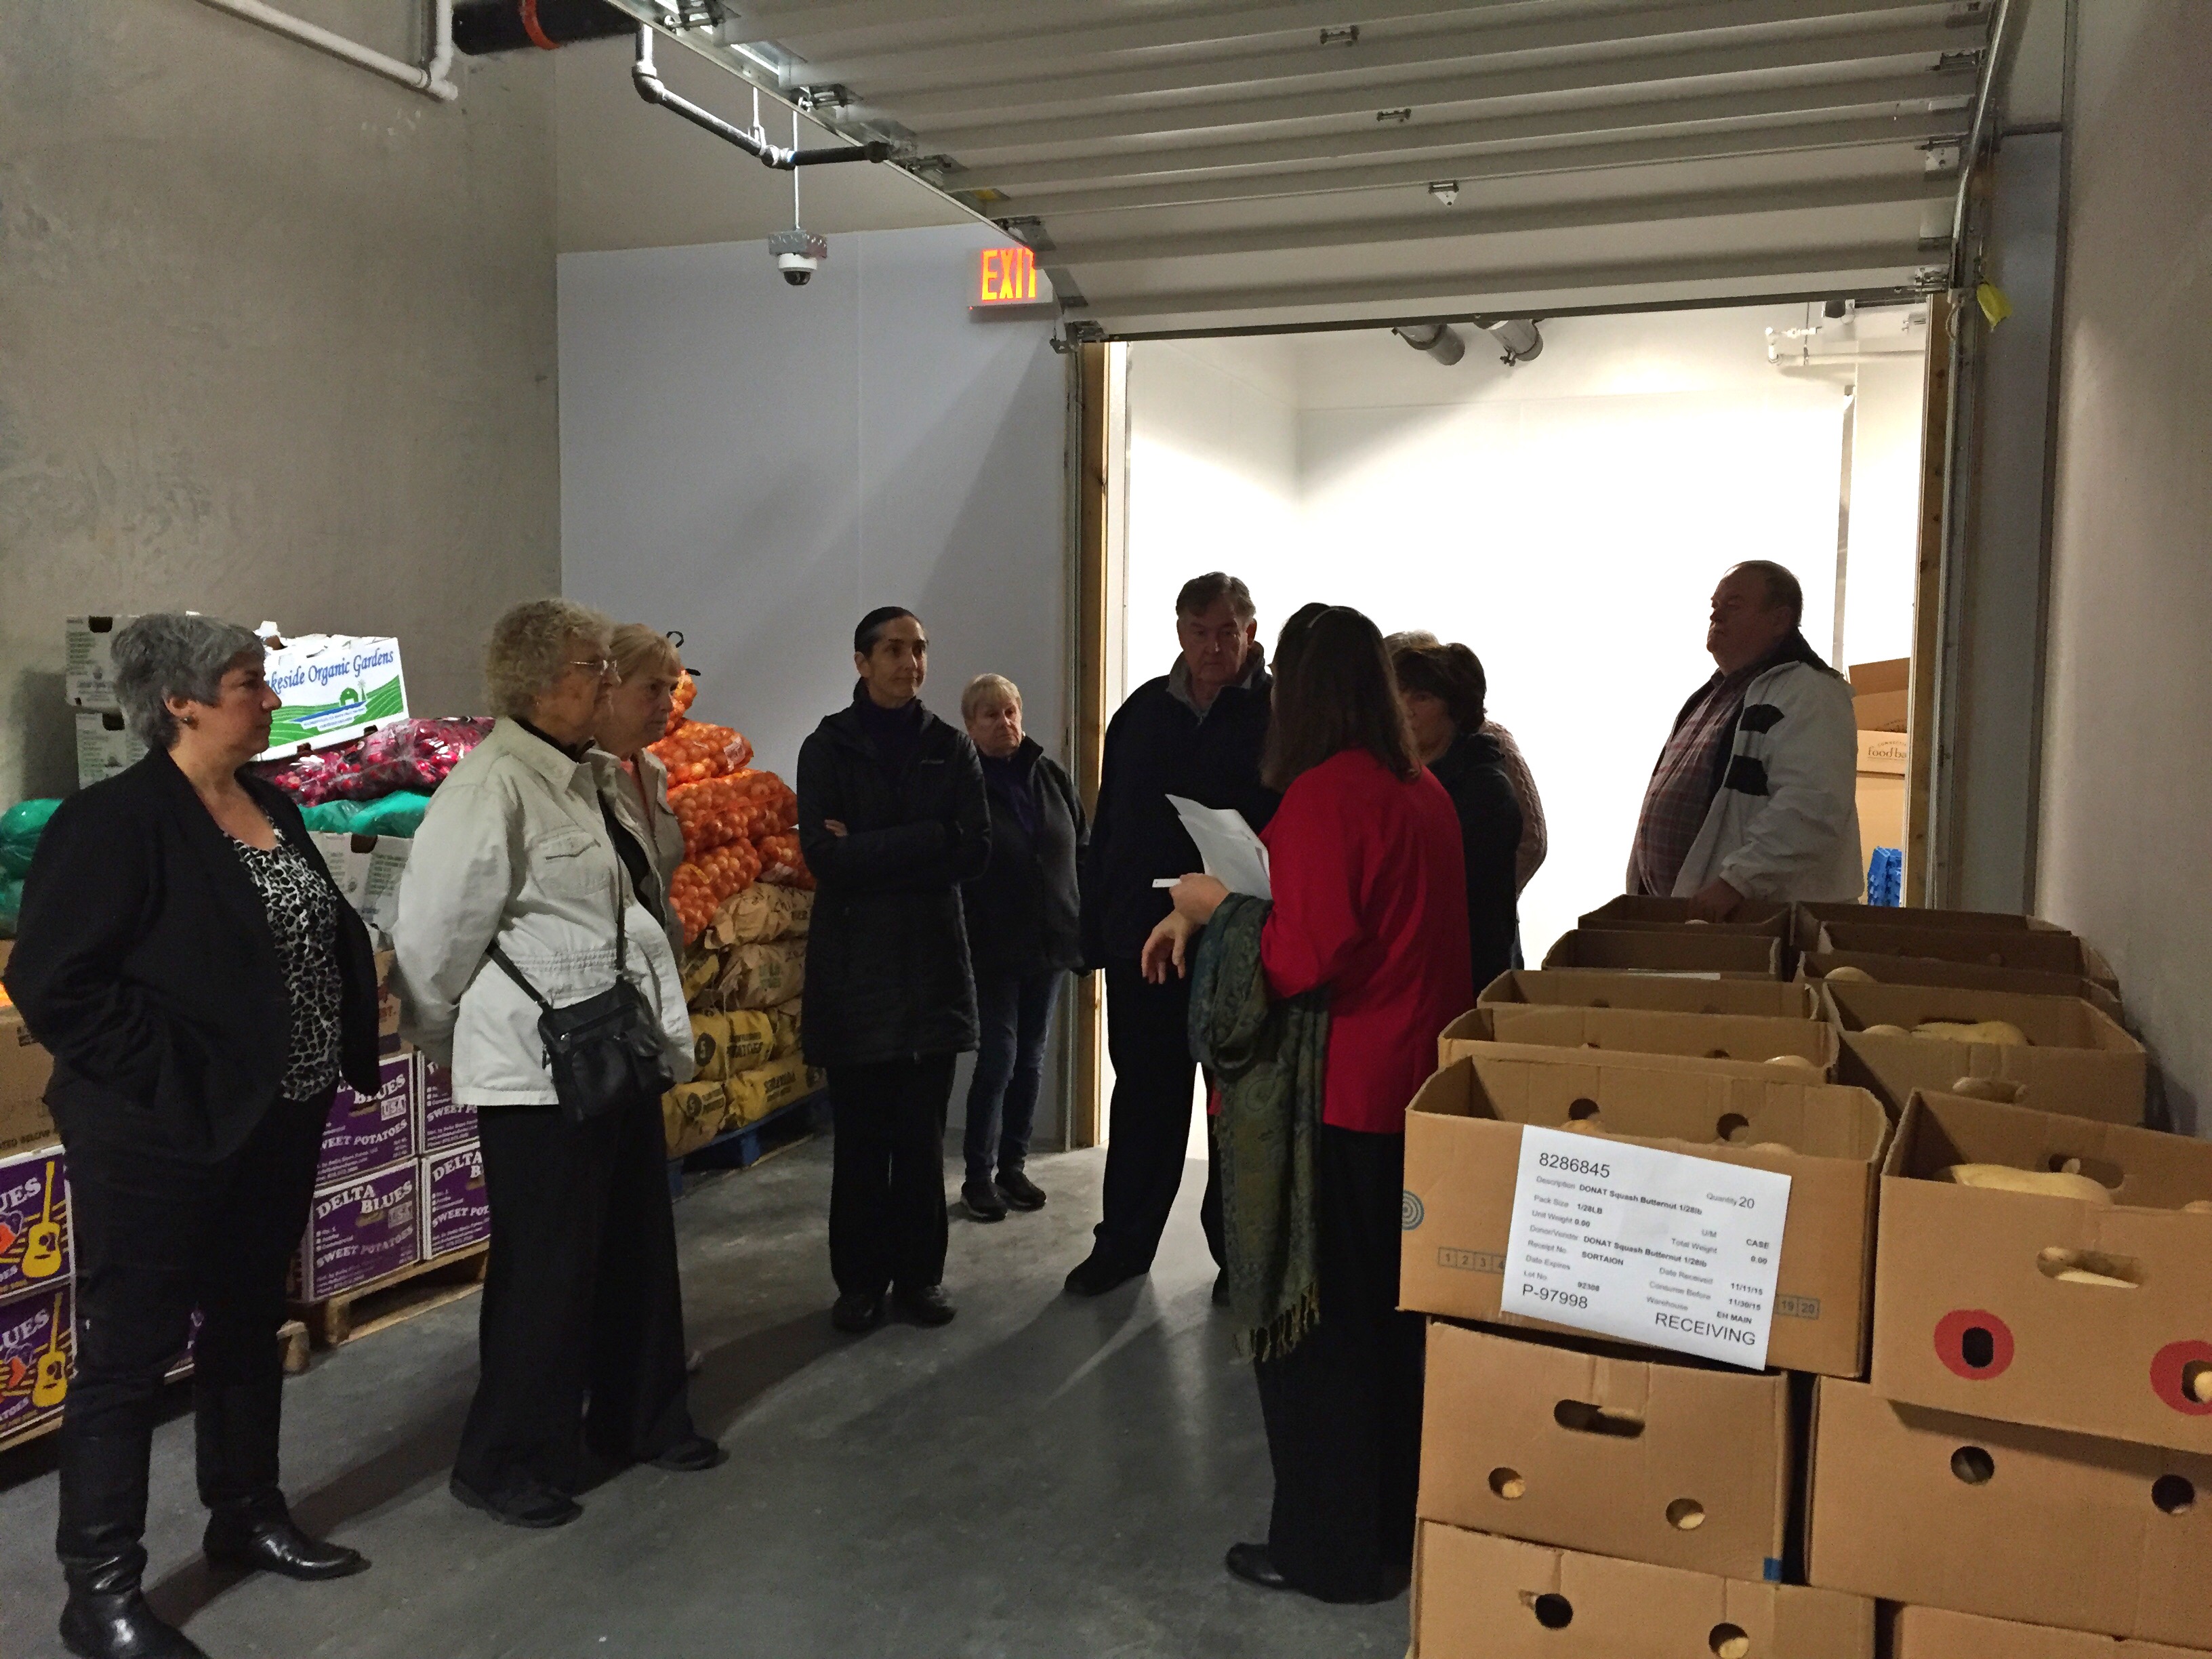 Visiting member programs get a glimpse of one of the cold storage spaces in our new distribution center. The increased storage capacity allows the Connecticut Food Bank to source more food and more types of food that we can distribute to member programs feeding the hungry in communities we serve.